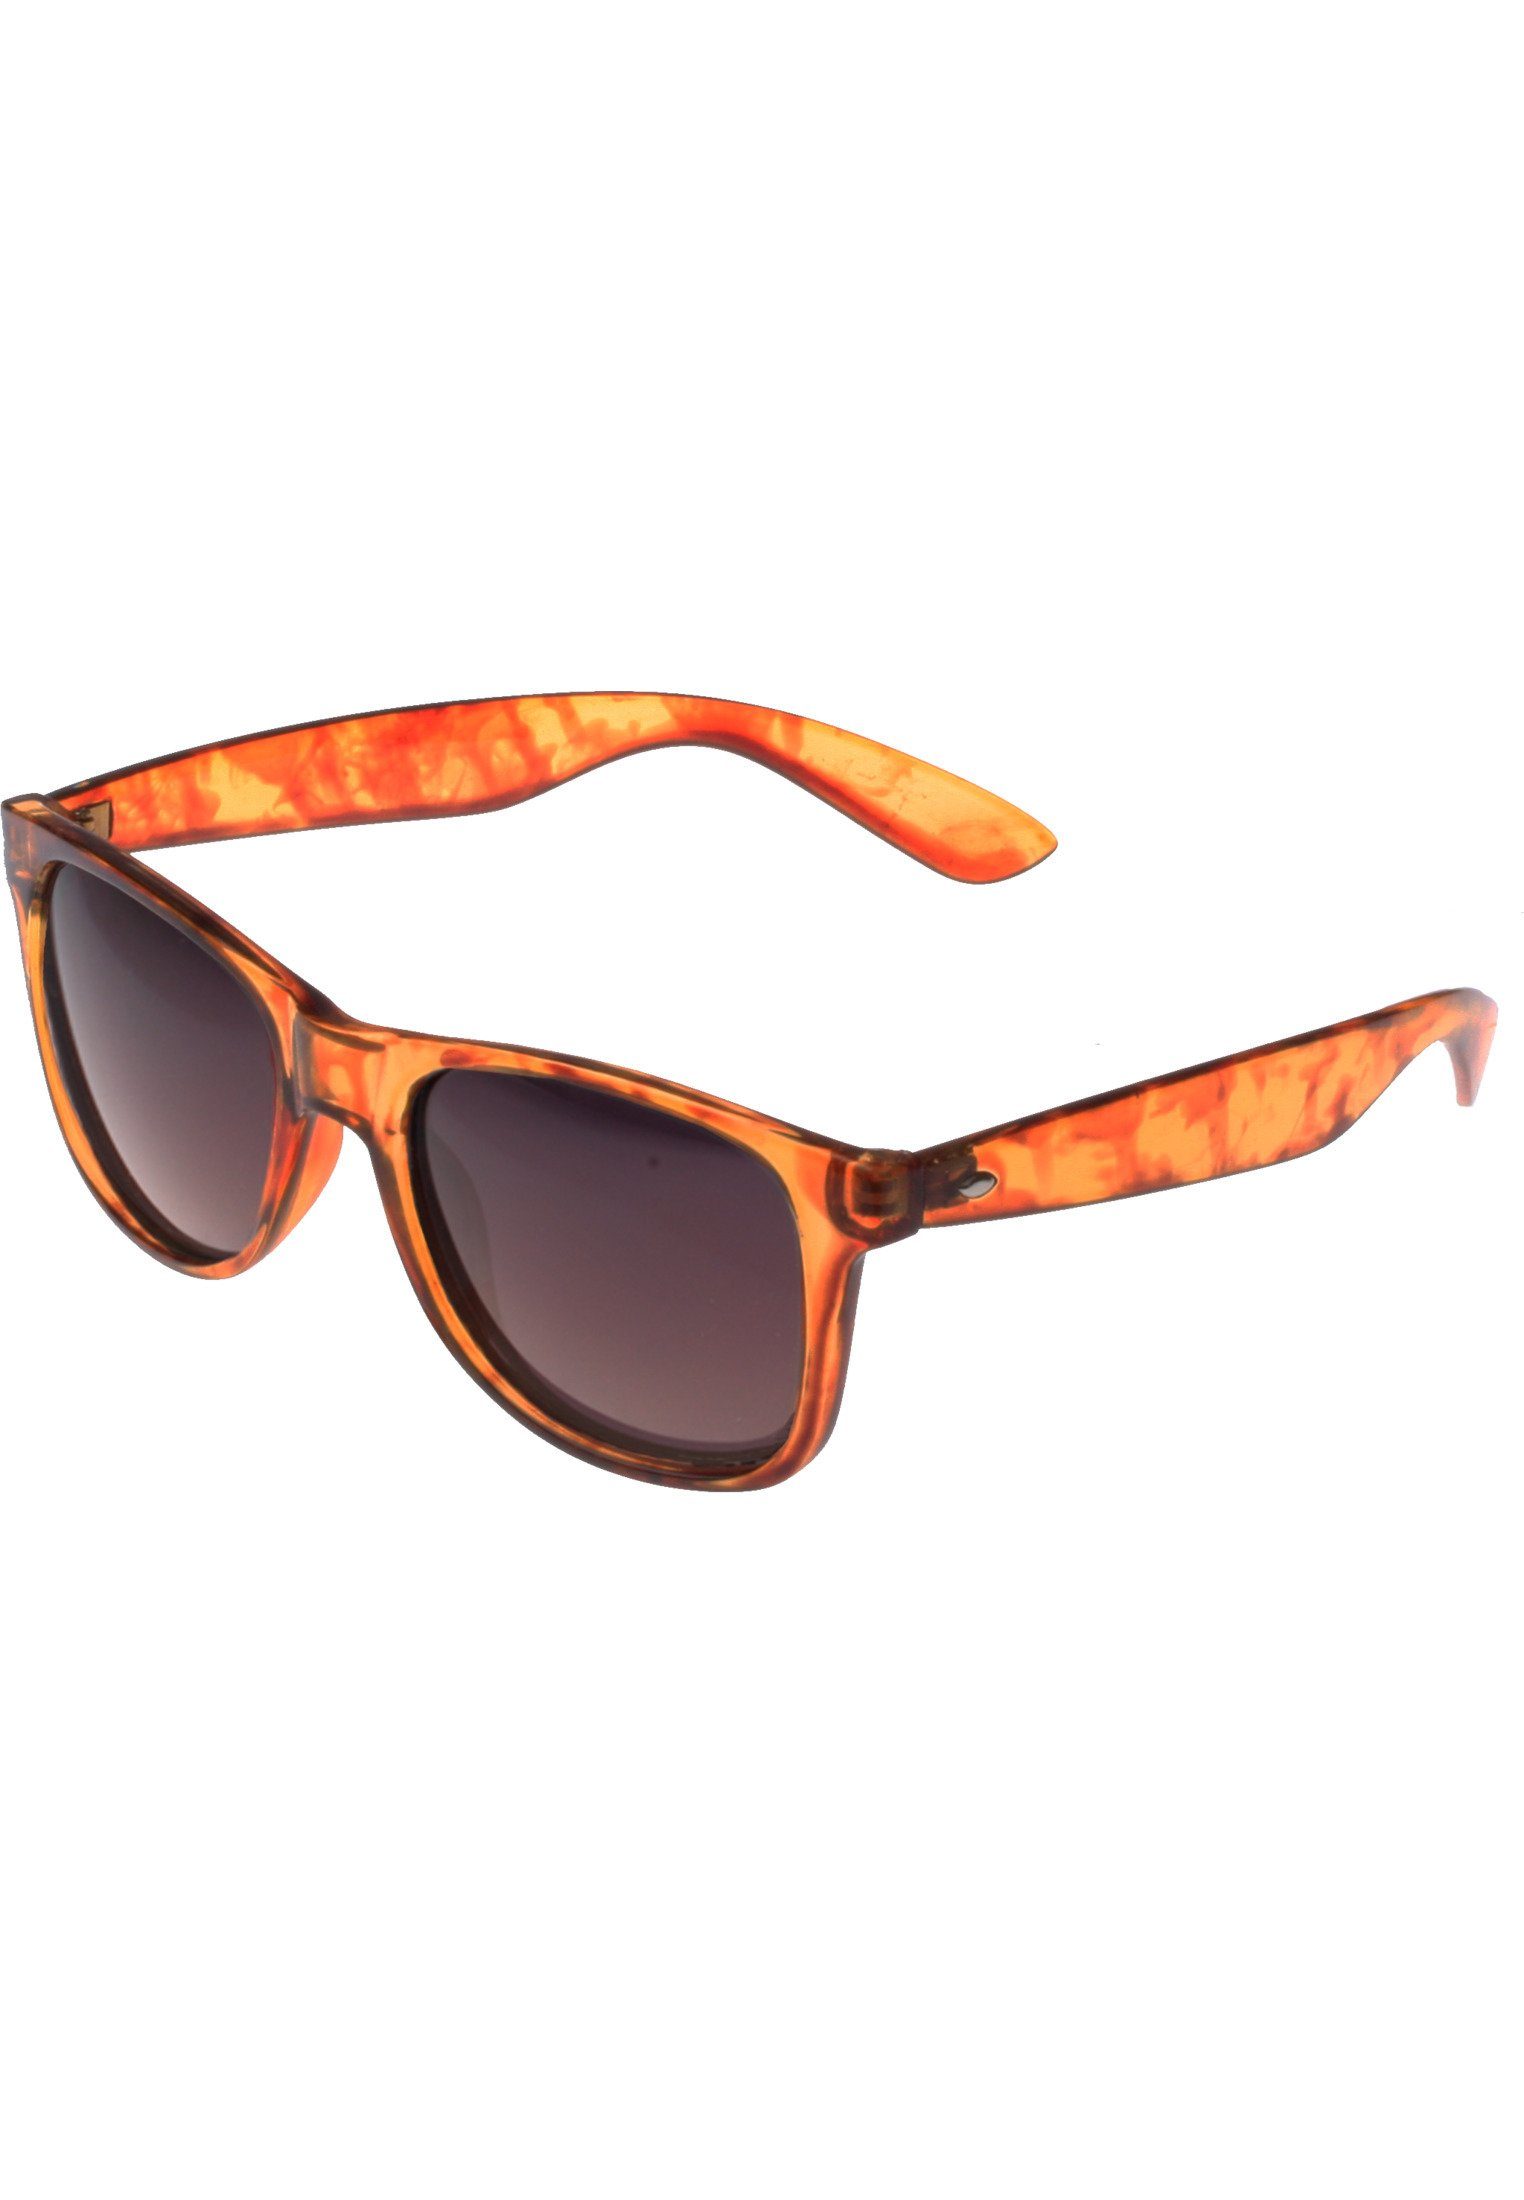 MSTRDS Shades amber GStwo Groove Sonnenbrille Accessoires